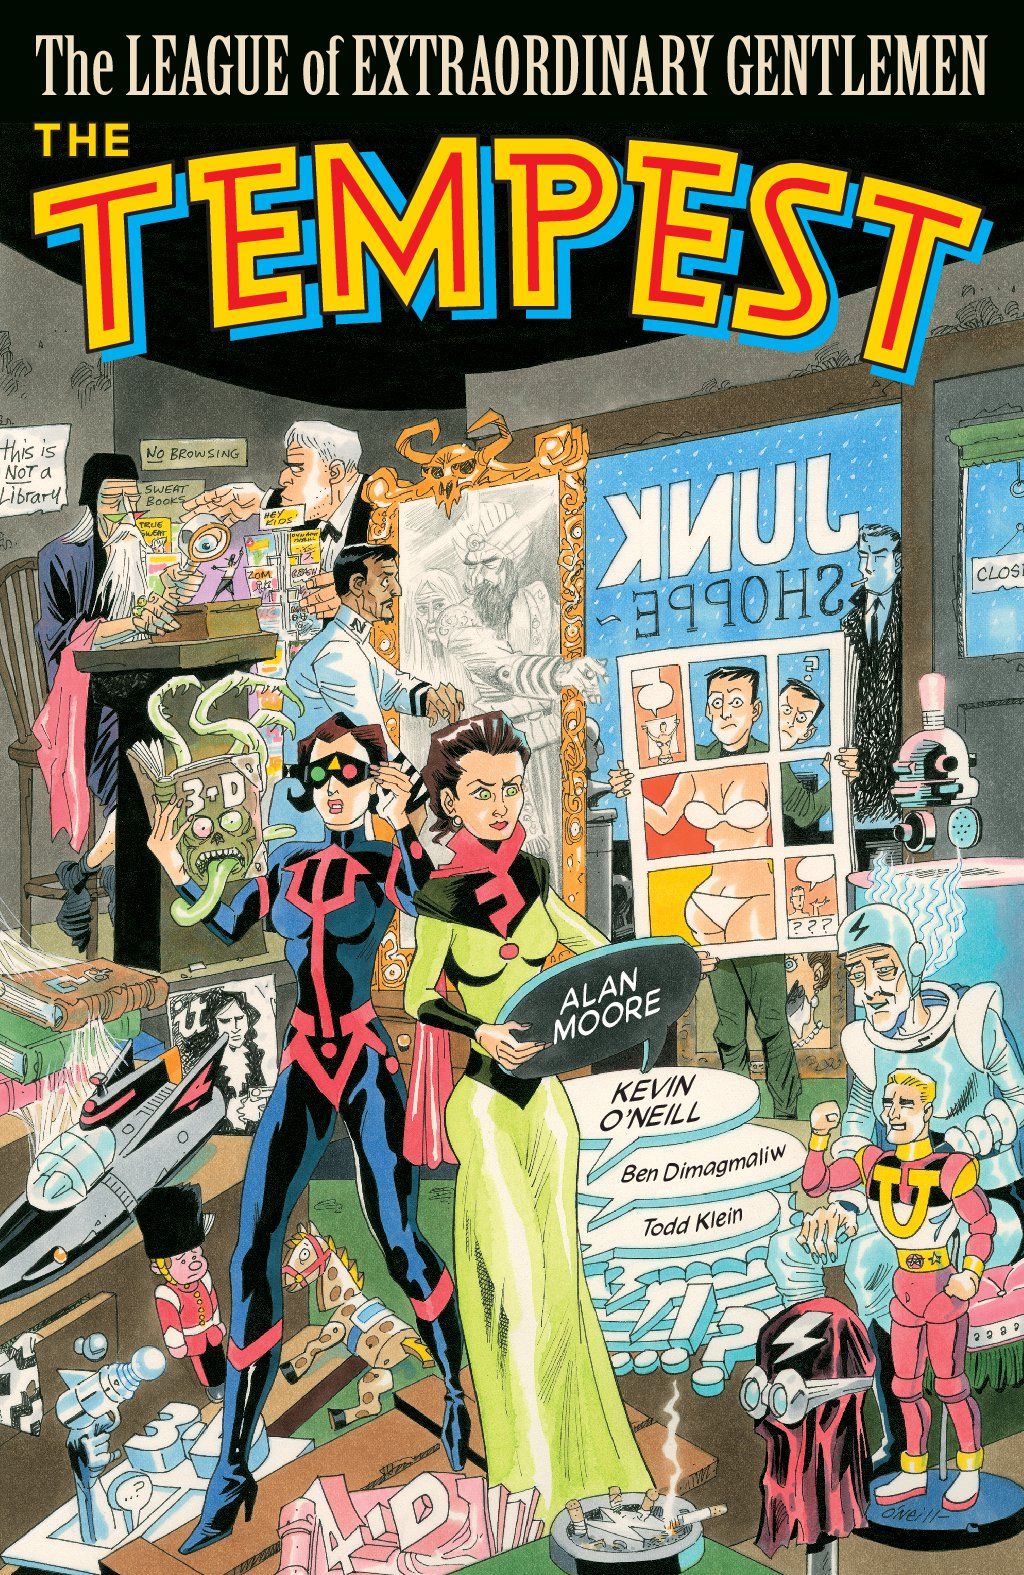 The League of Extraordinary Gentlemen, Vol IV: The Tempest